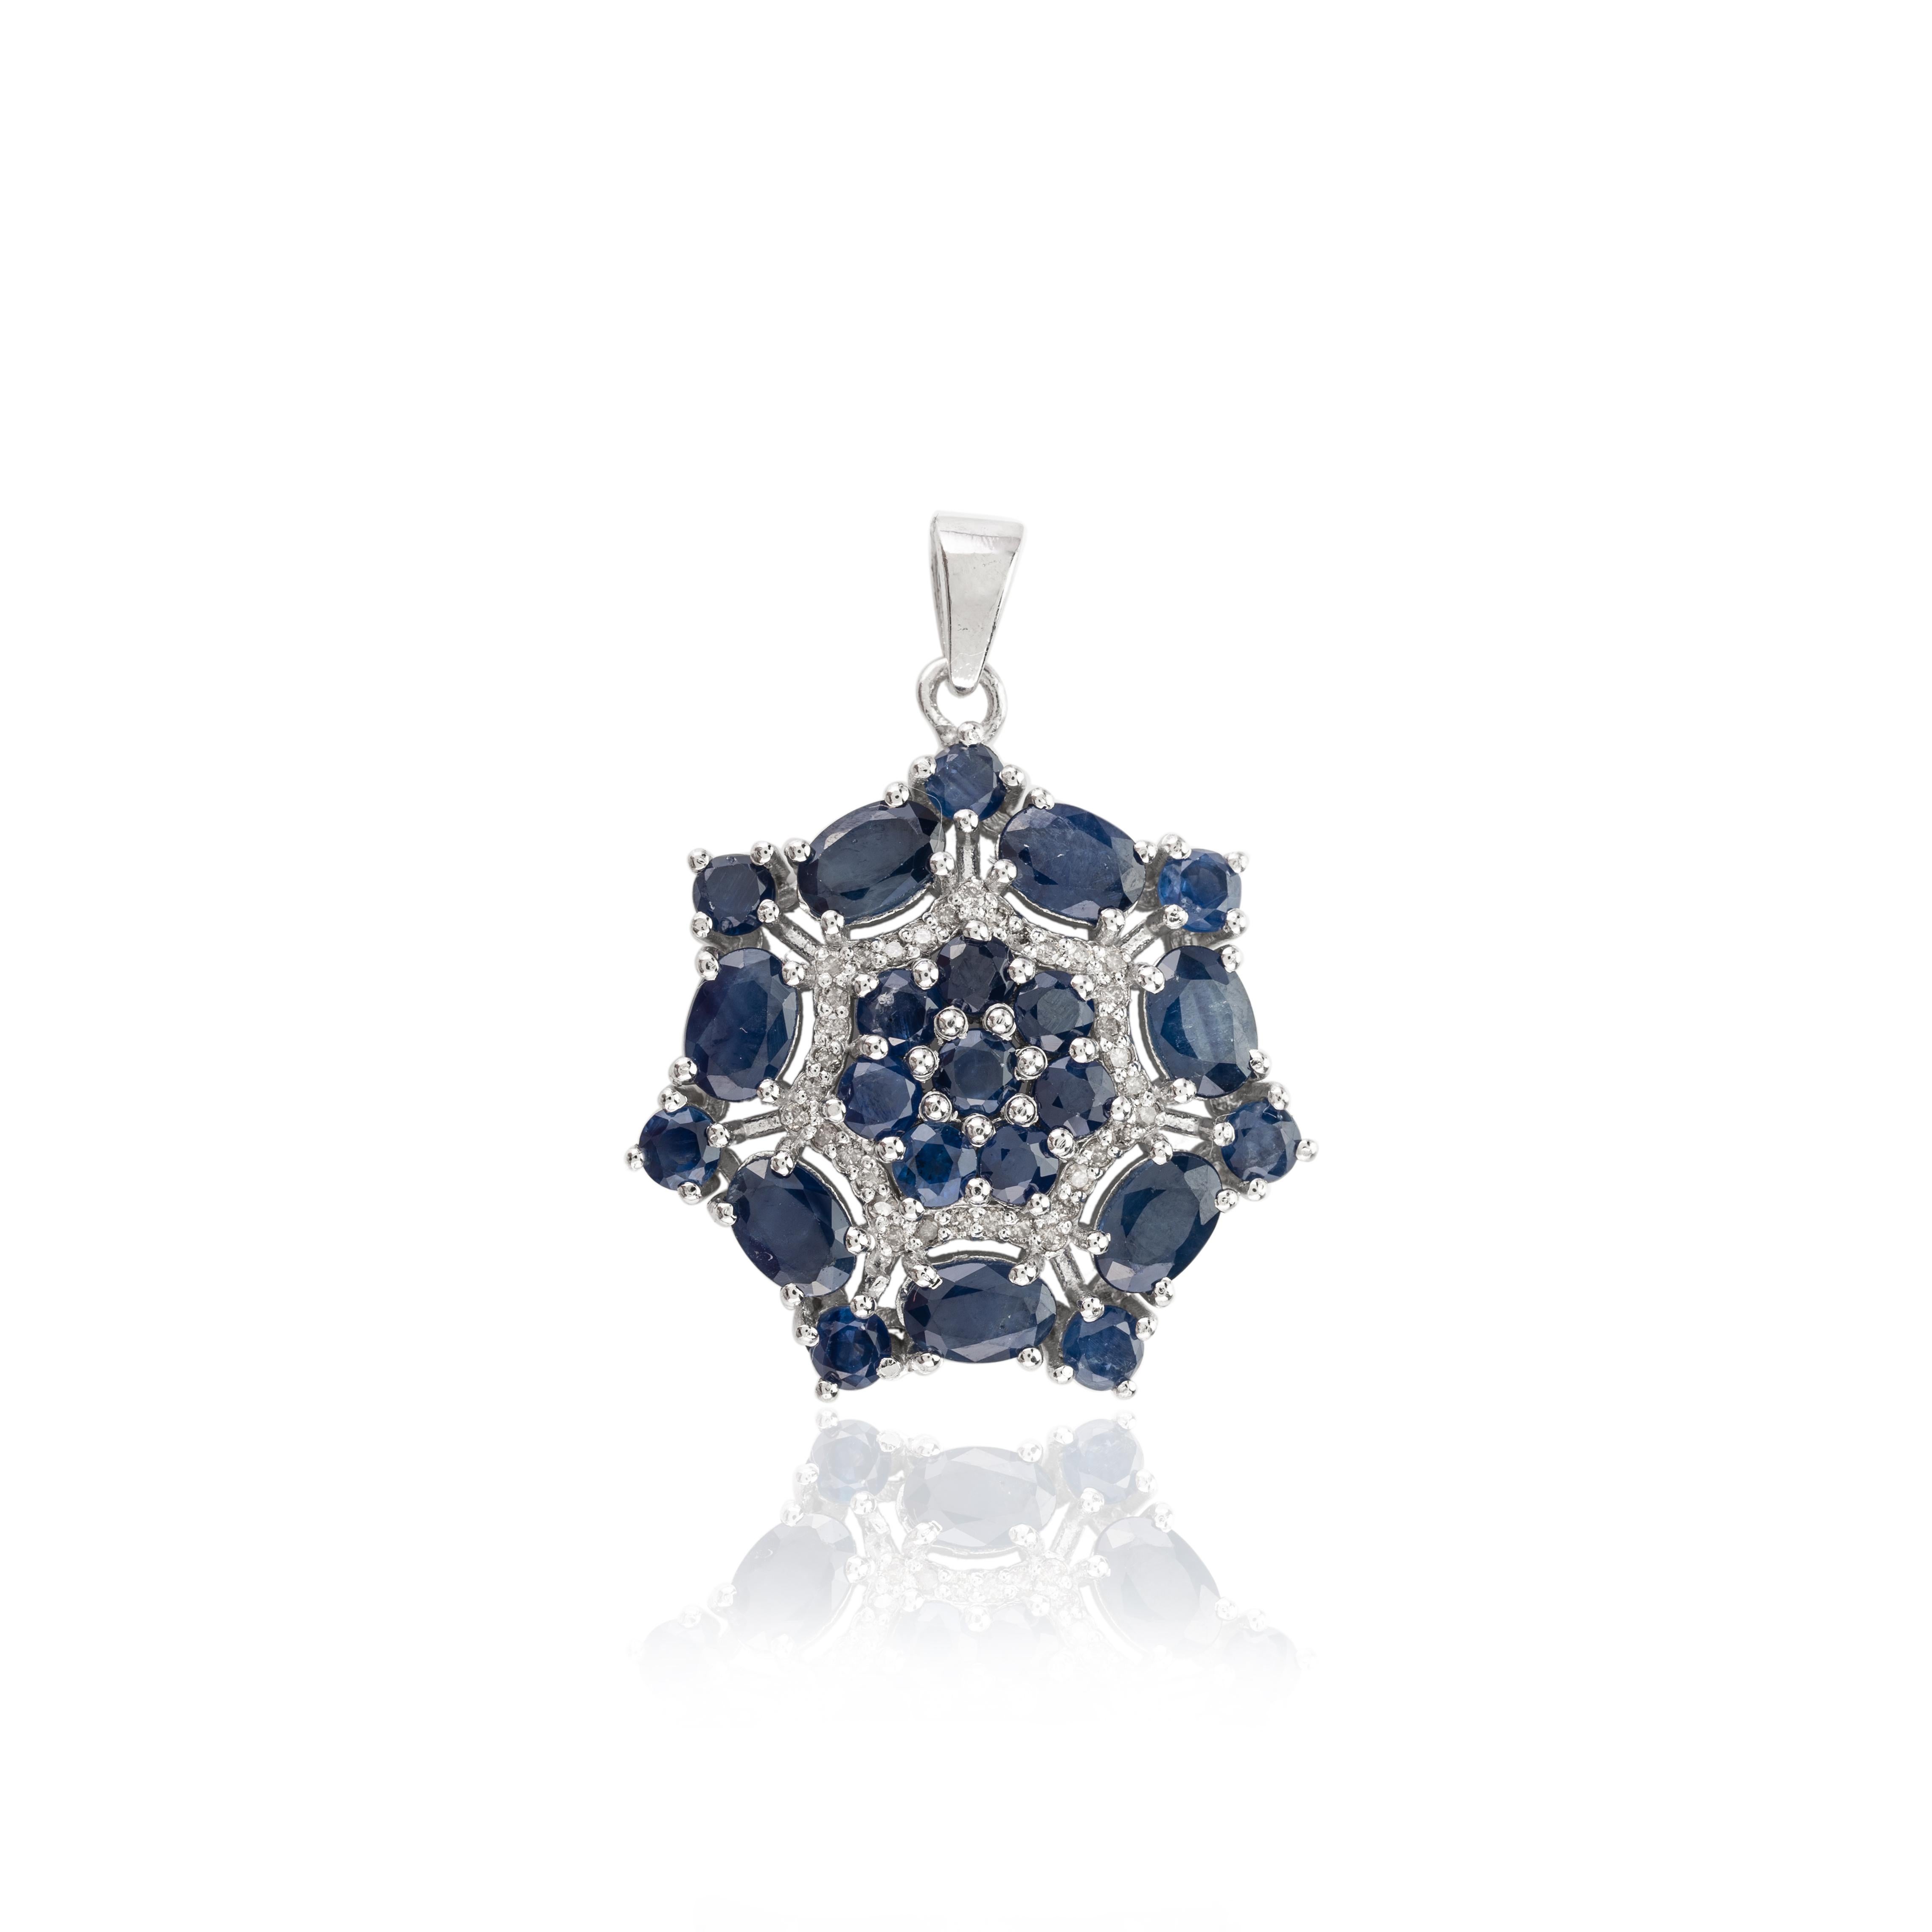 7.15 Cts Natural Blue Sapphire Cluster Flower Pendant in .925 Sterling Silver In New Condition For Sale In Houston, TX